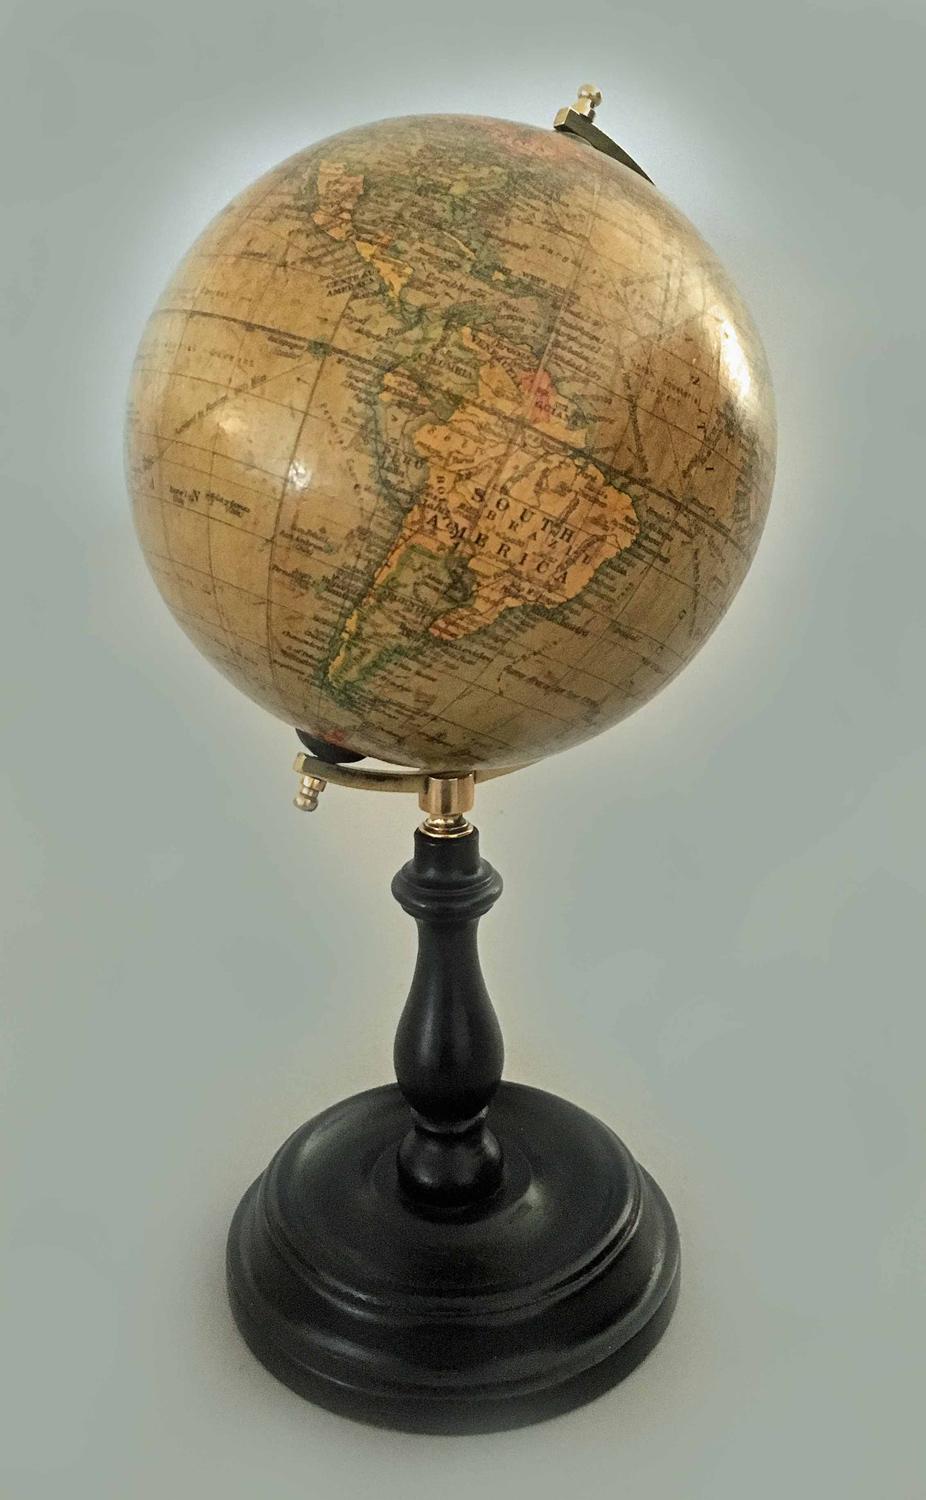 Six inch terrestrial desk globe held in place by a brass meridian mounted on an ebonized turned Stand, signed Geographia, 55 Fleet St, London.